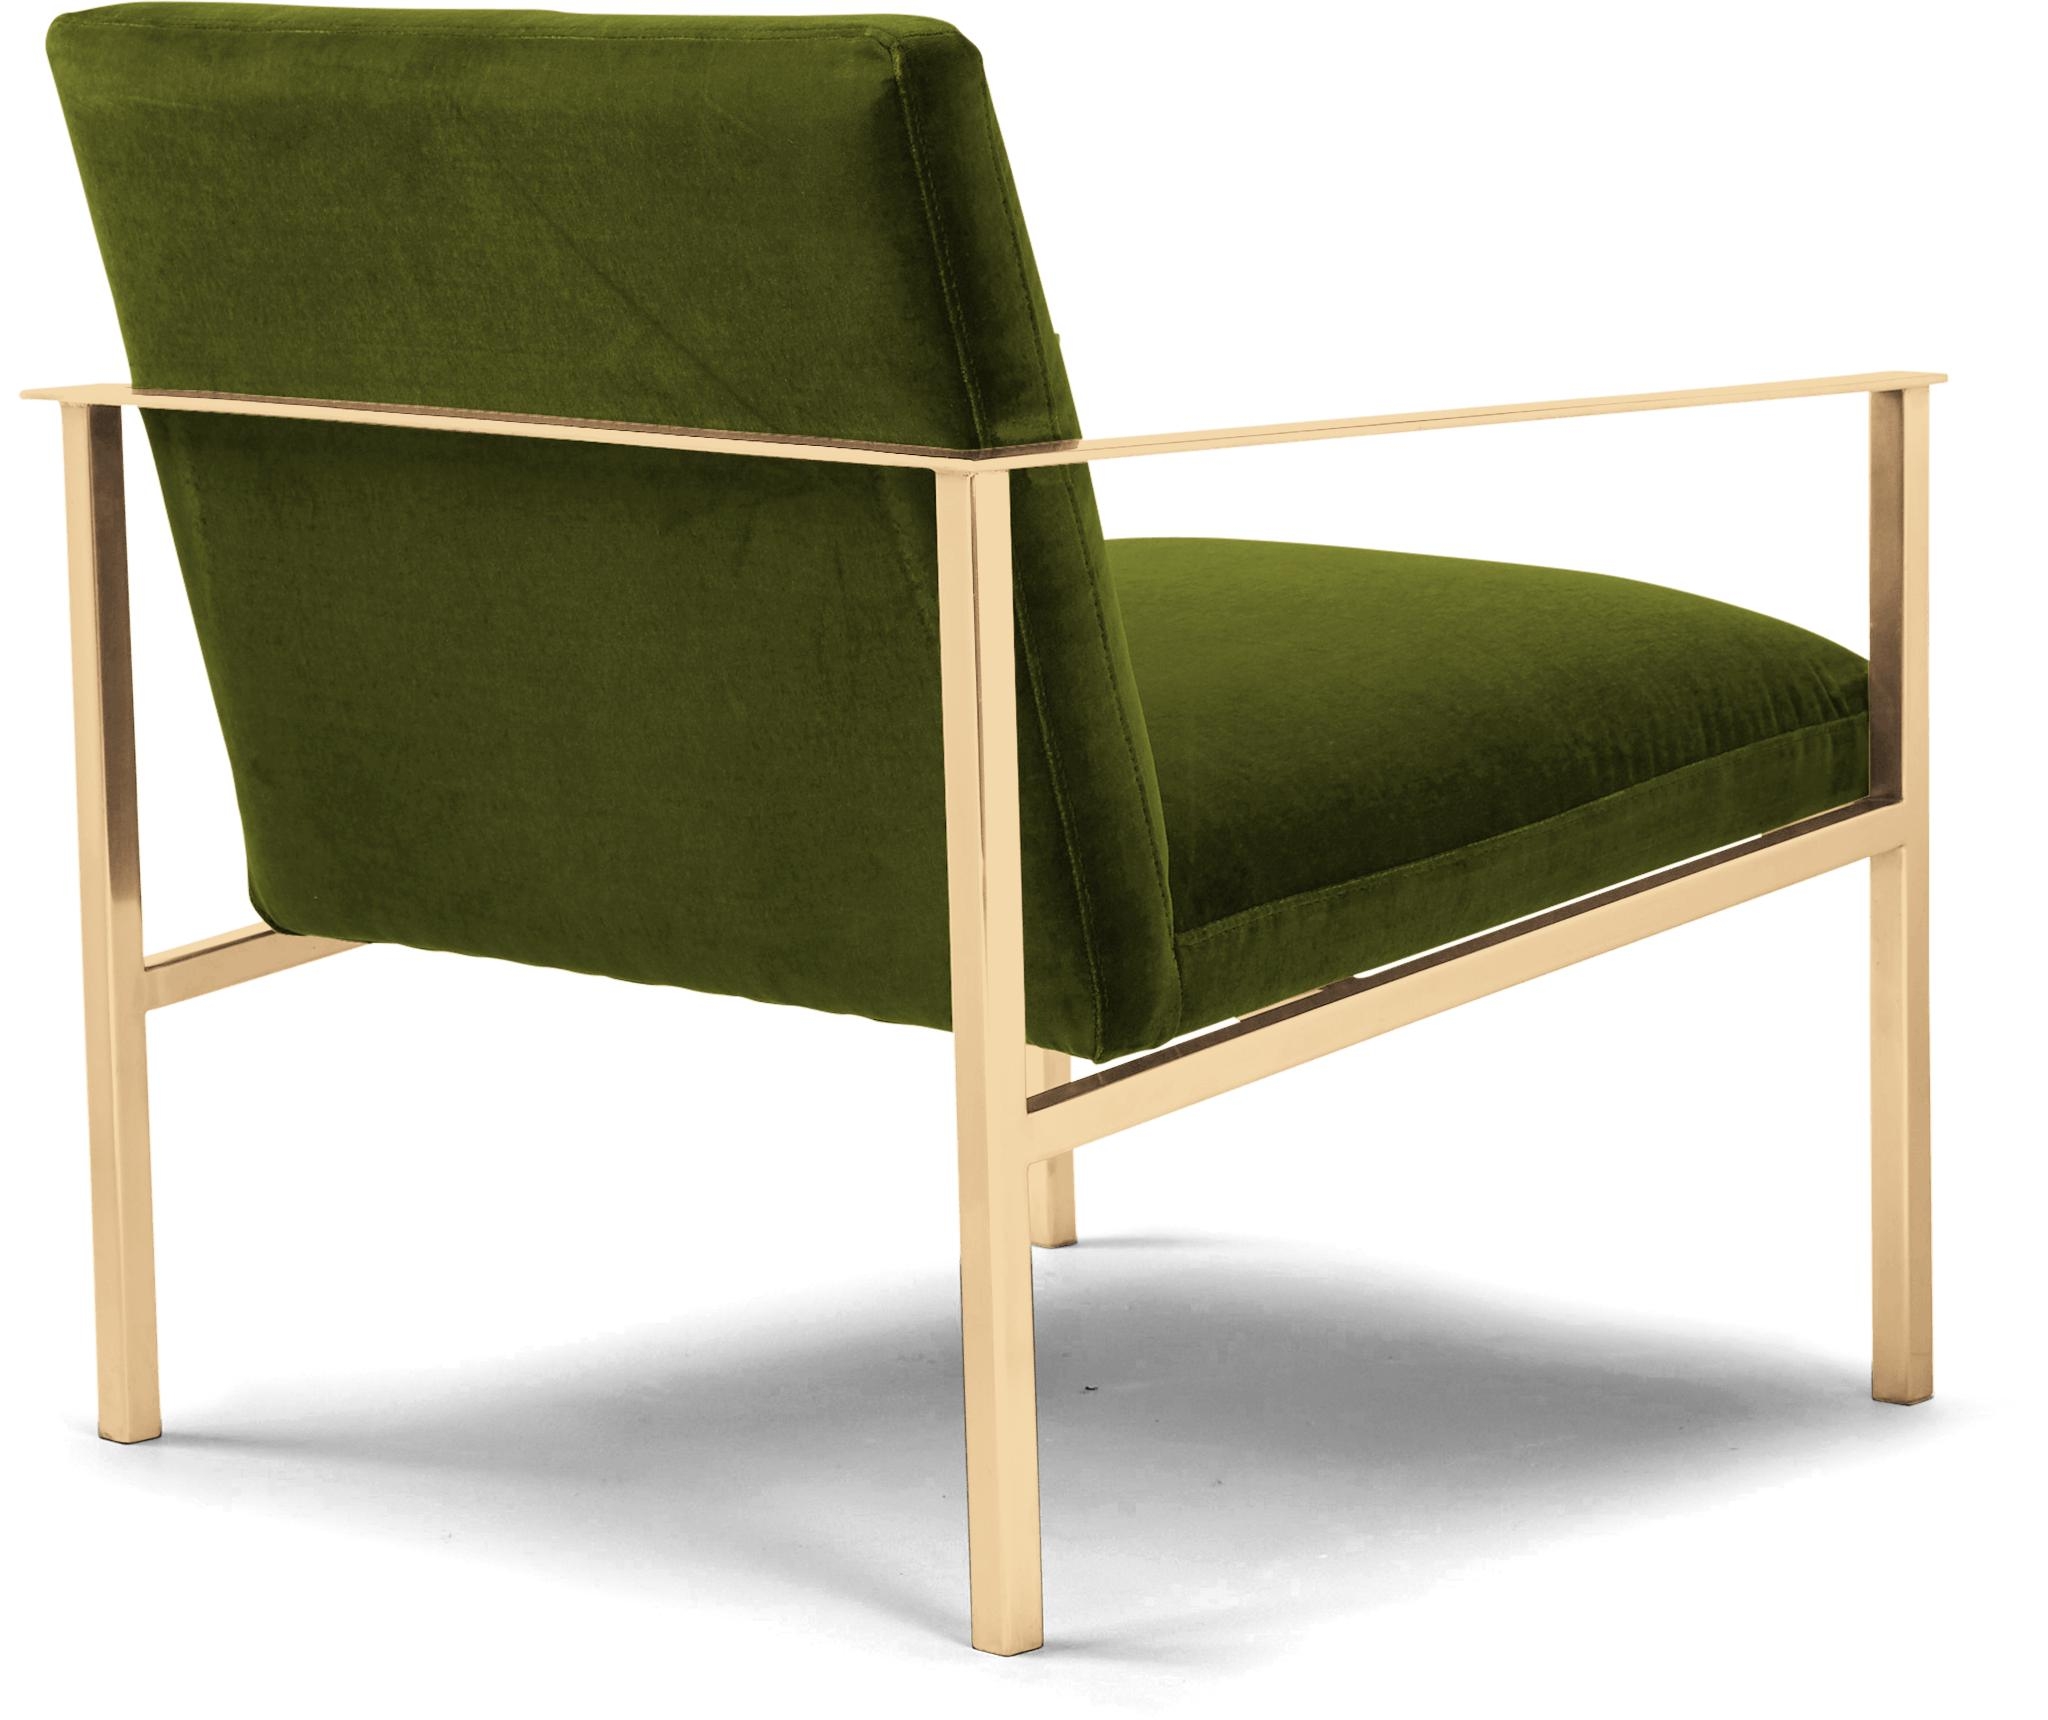 Green Orla Mid Century Modern Accent Chair - Royale Apple - Image 3